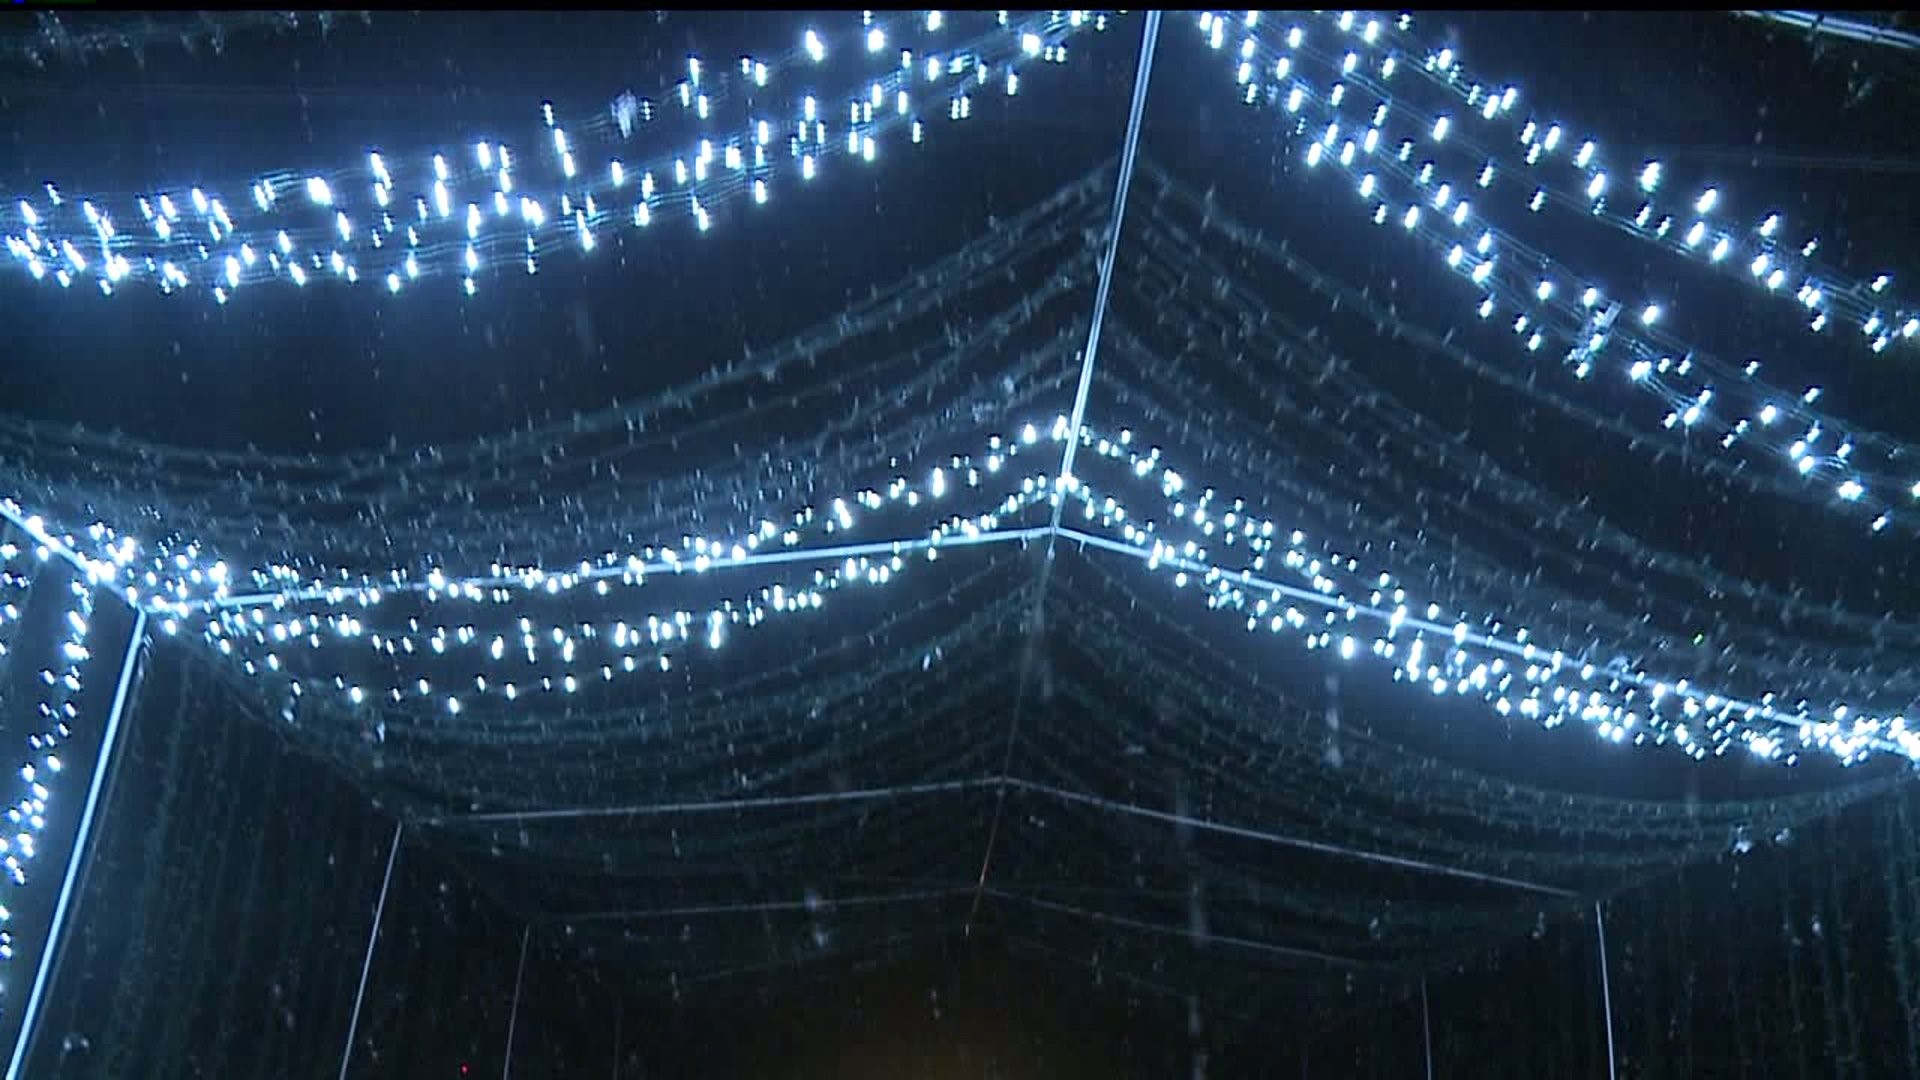 An ultimate drive-thru holiday light display in Lancaster County